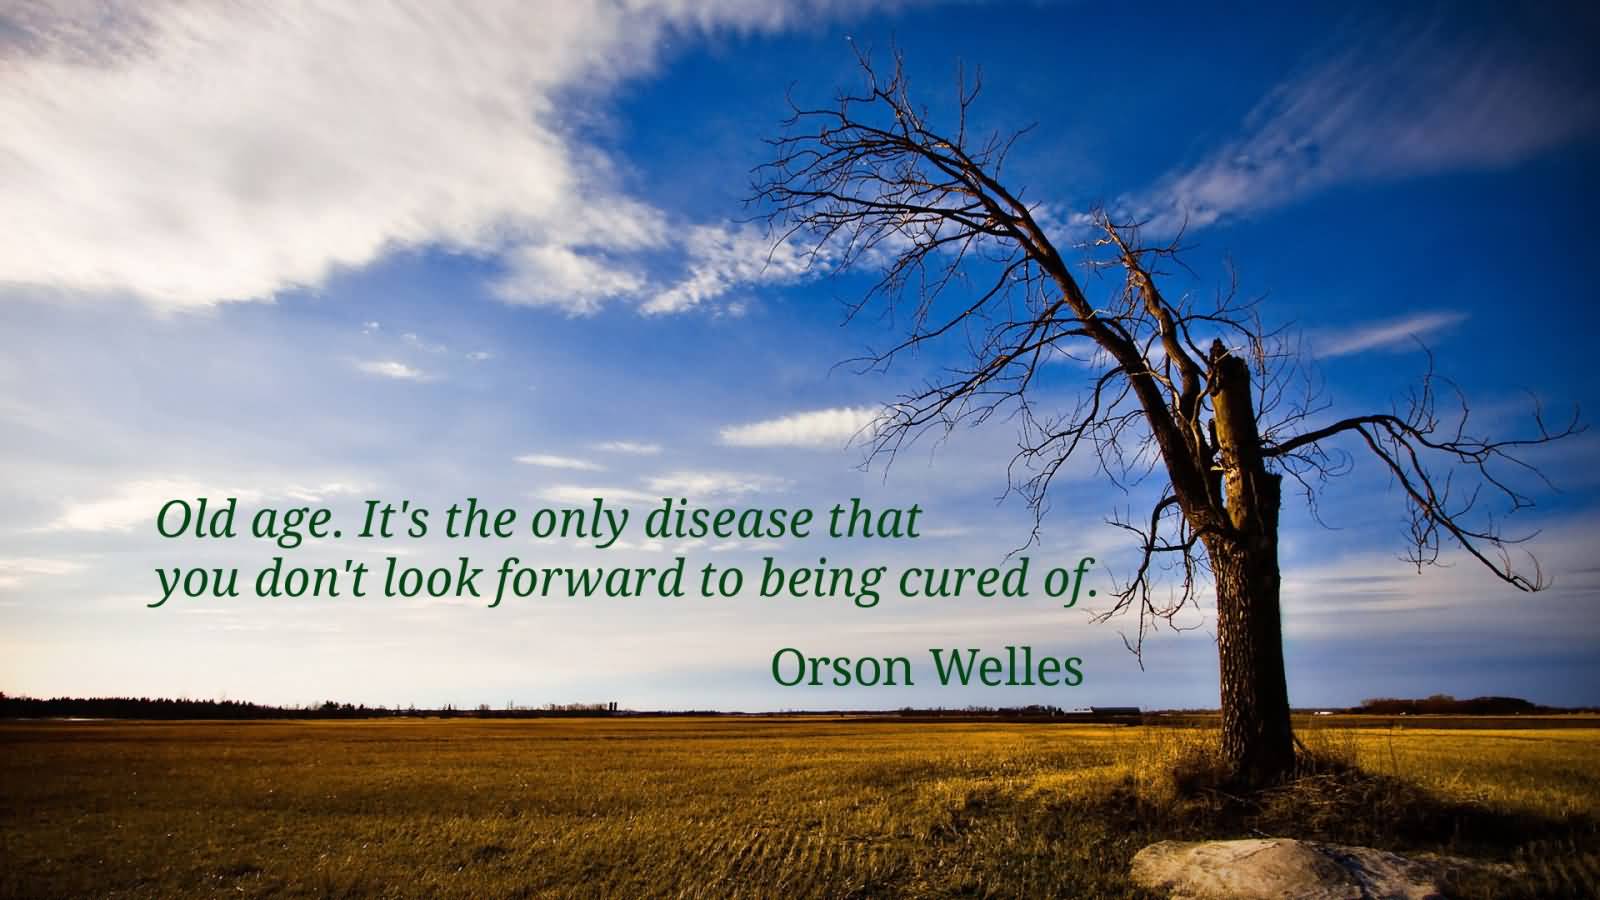 Old age. It's the only disease that you don't look forward to being cured of. Orson Welles